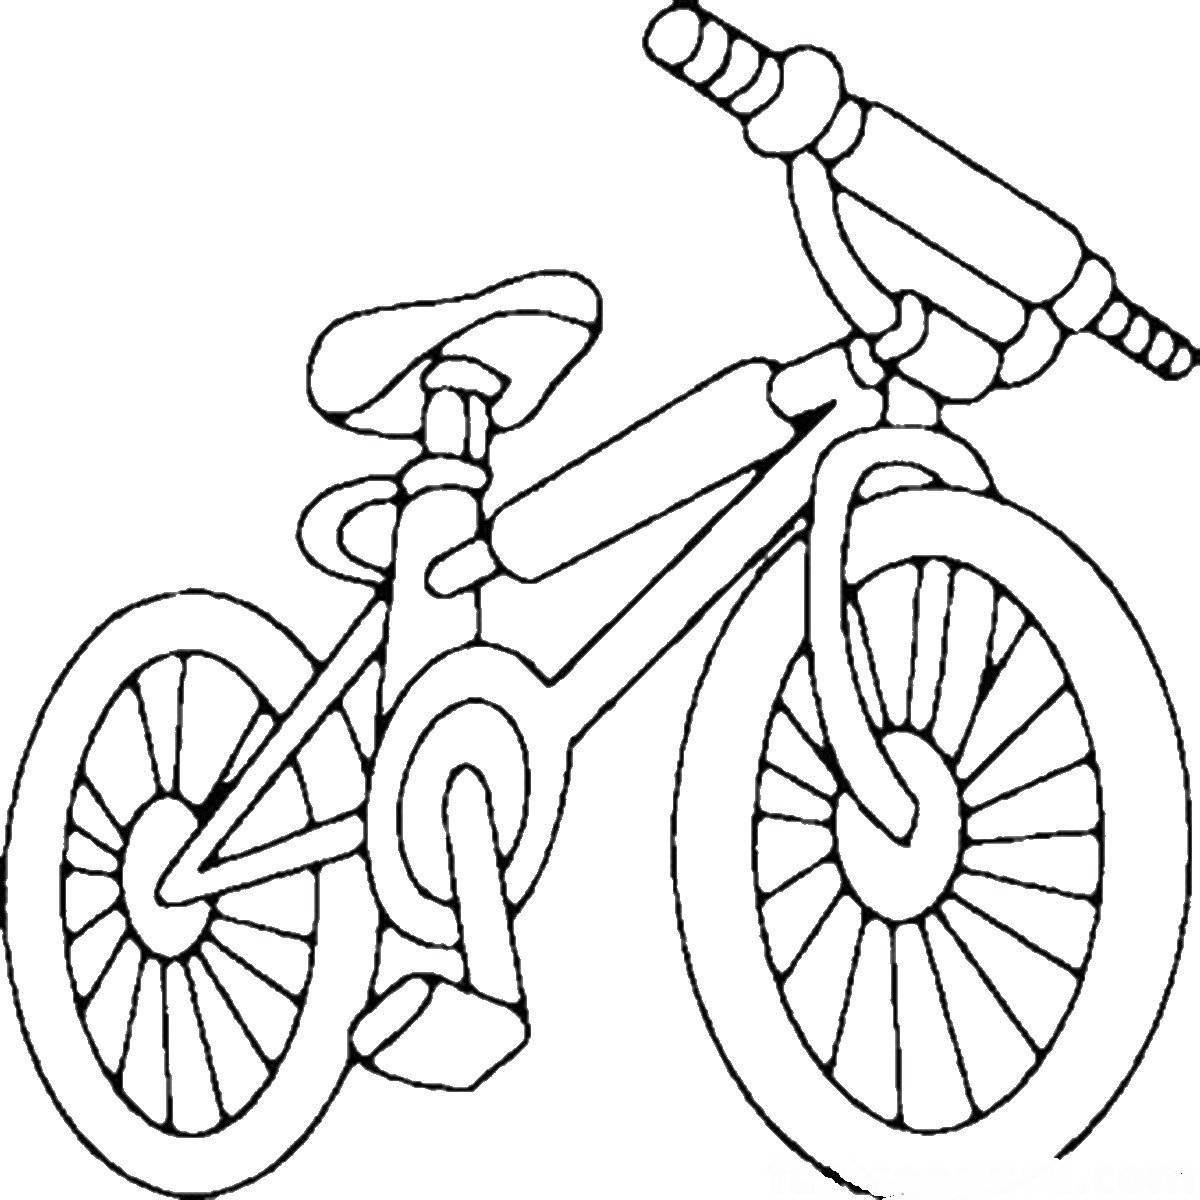 Playful bike coloring page for kids